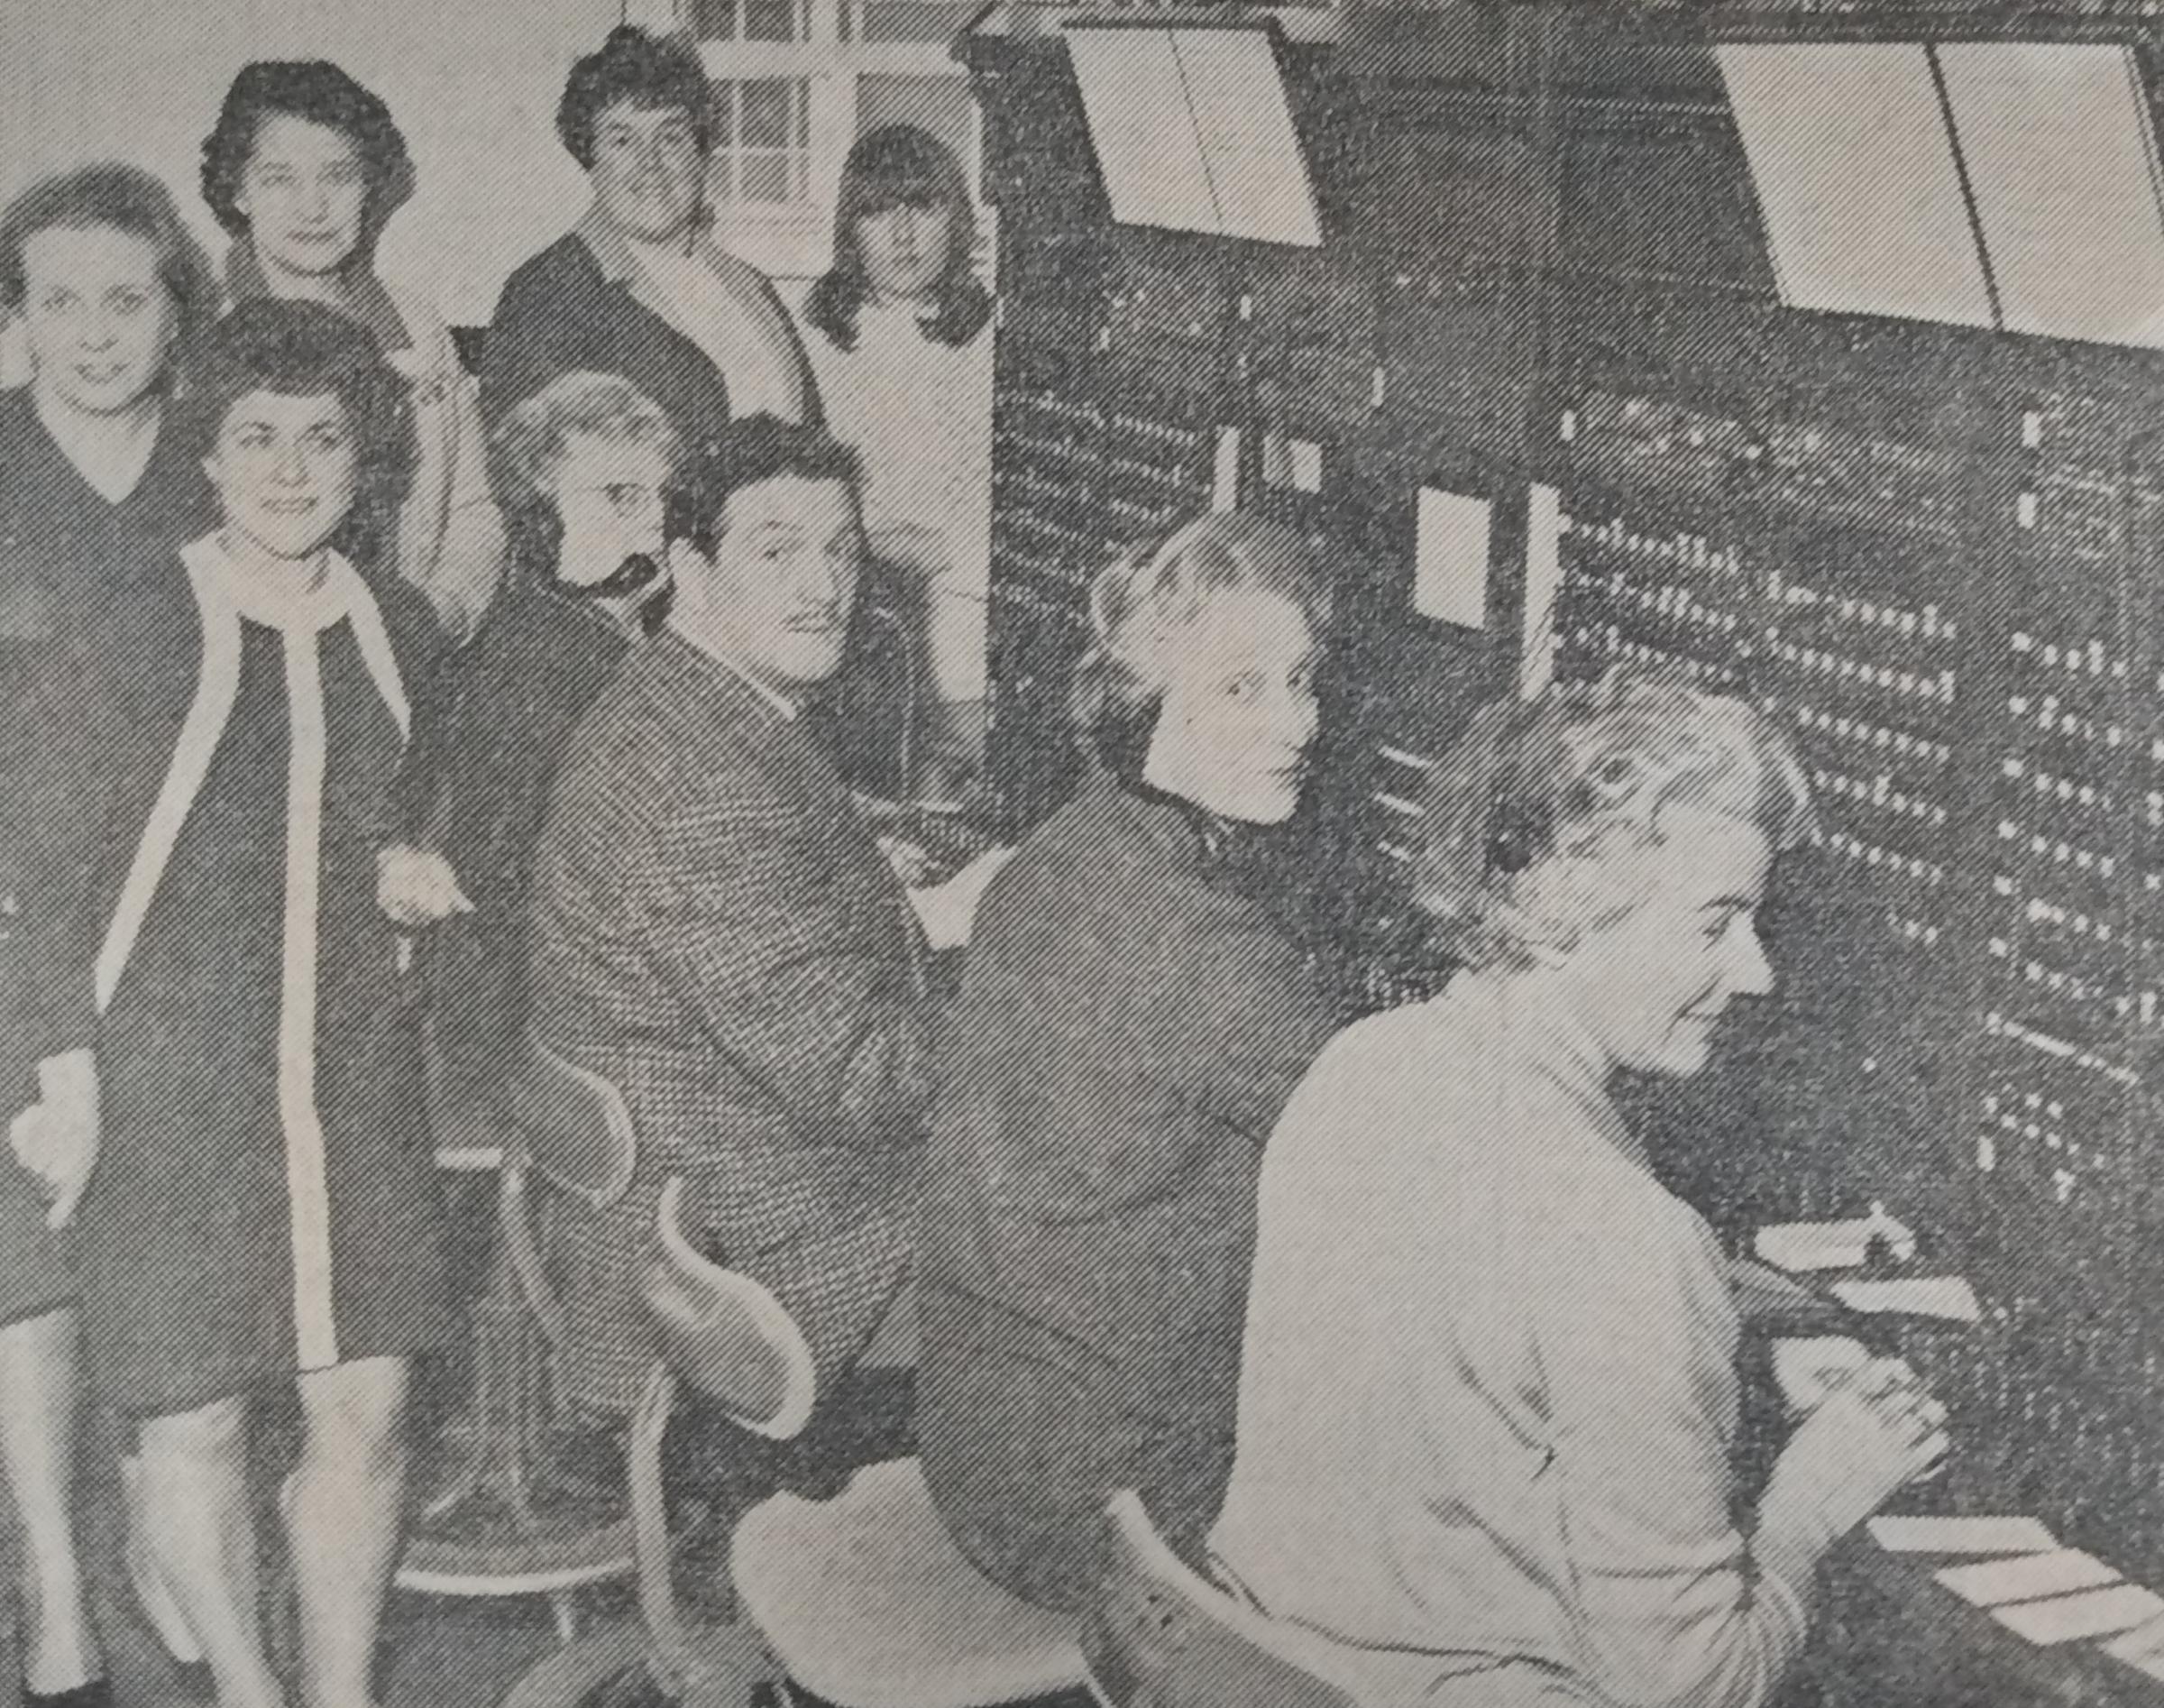 It’s November 1967 and the team of daytime telephone exchange operators are pictured just a few months before they were due to be replaced by an automated system